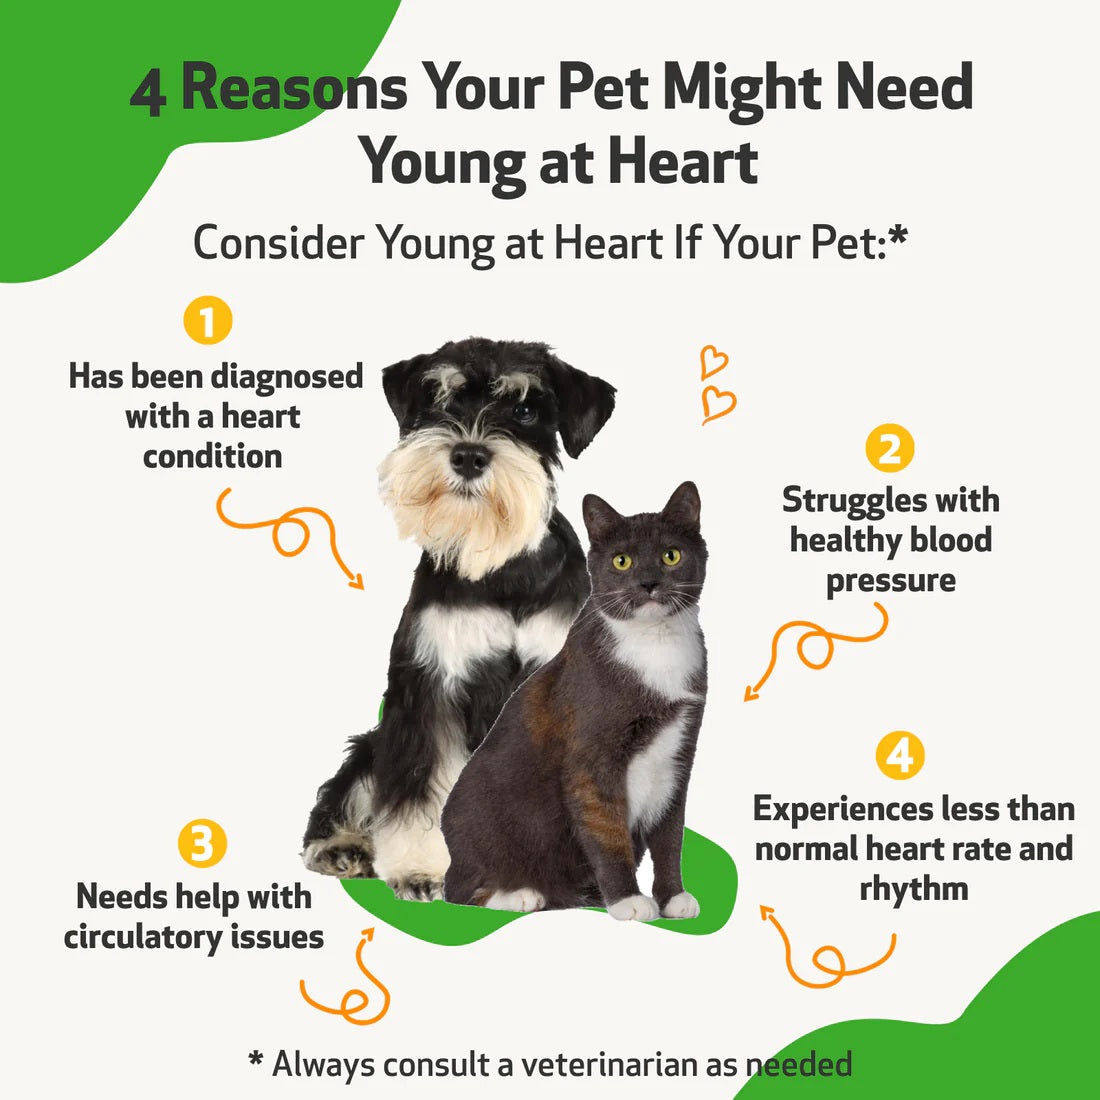 Pet Wellbeing - Young at Heart - for Healthy Heart Maintenance in Cats & Dogs